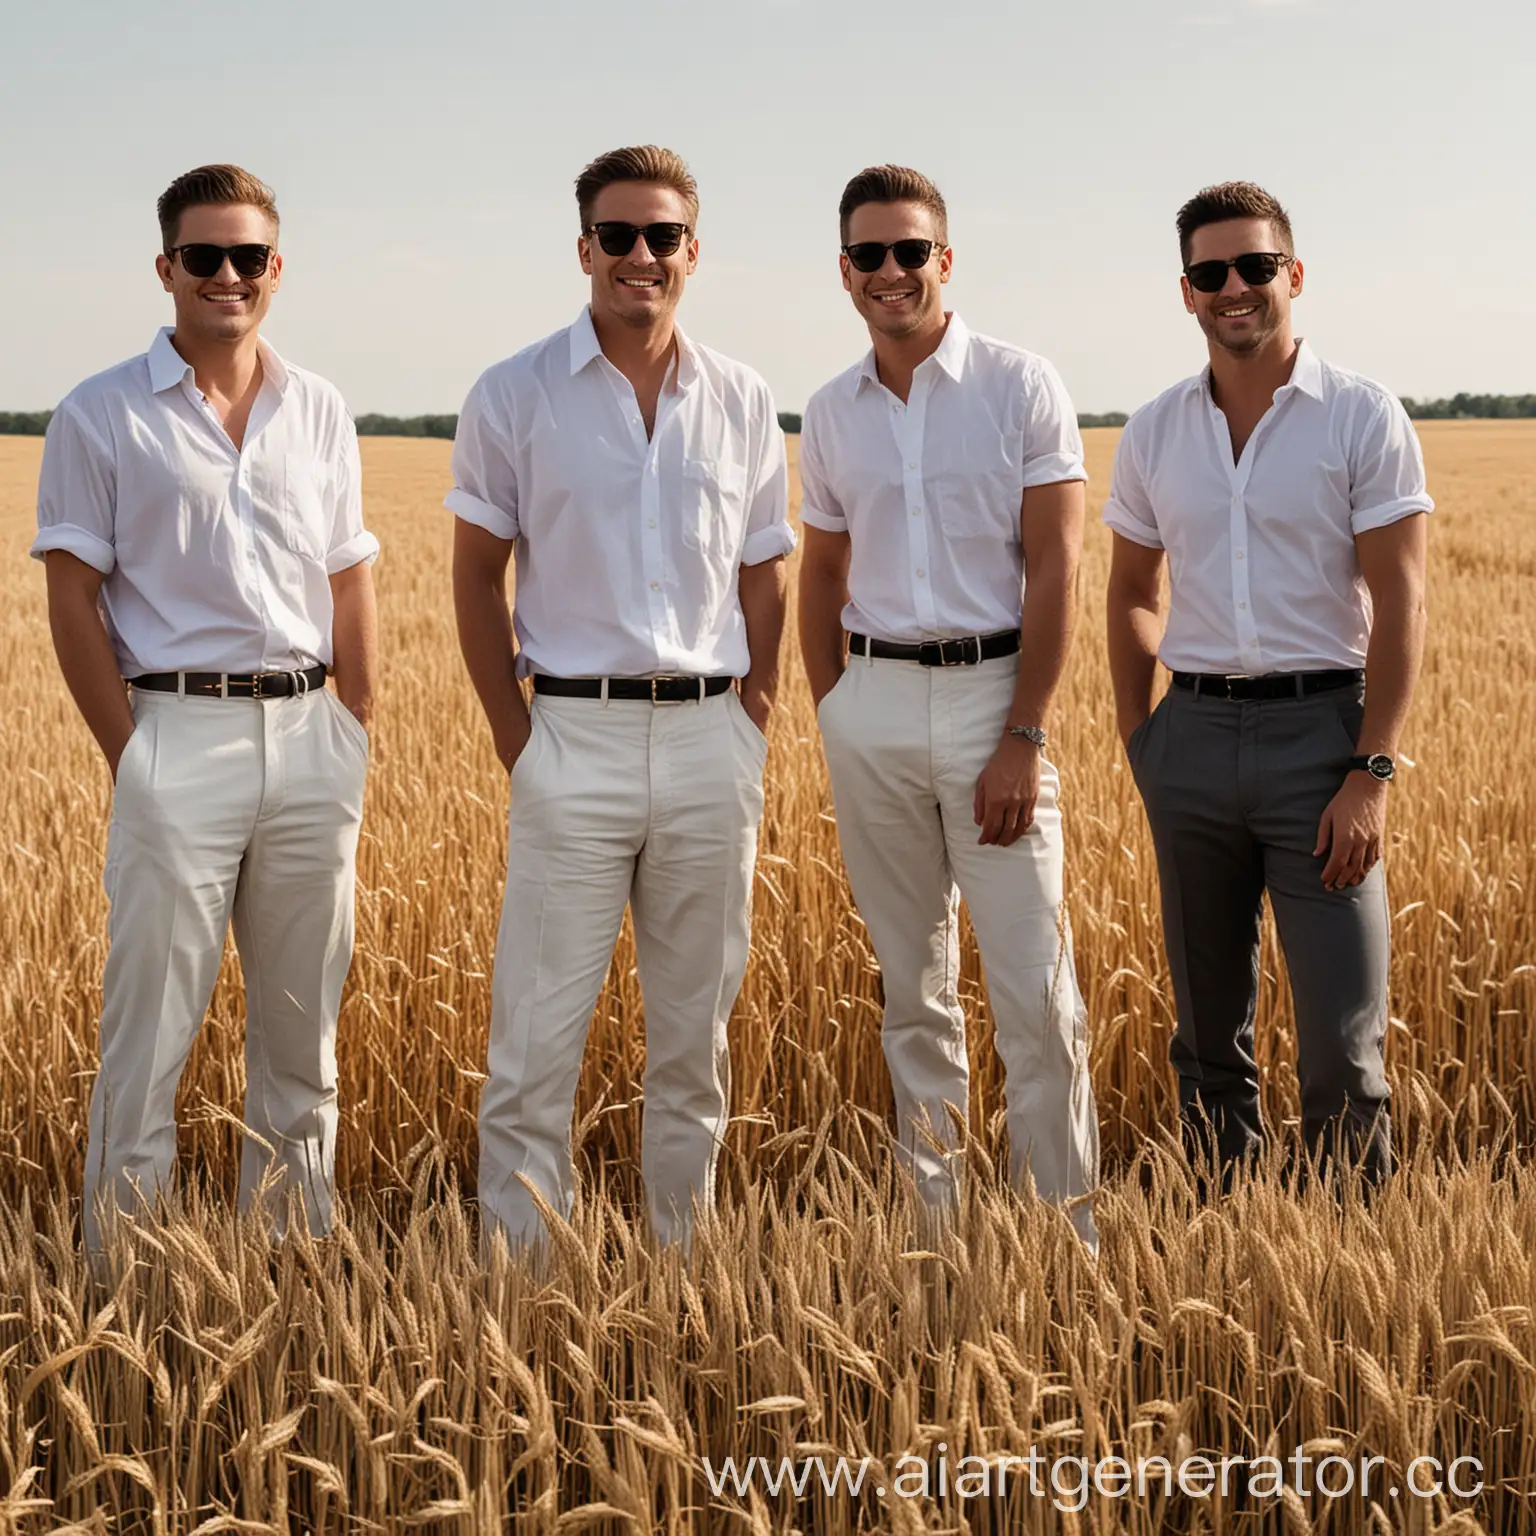 Four-Men-in-White-Shirts-and-Sunglasses-Standing-in-Grain-Field